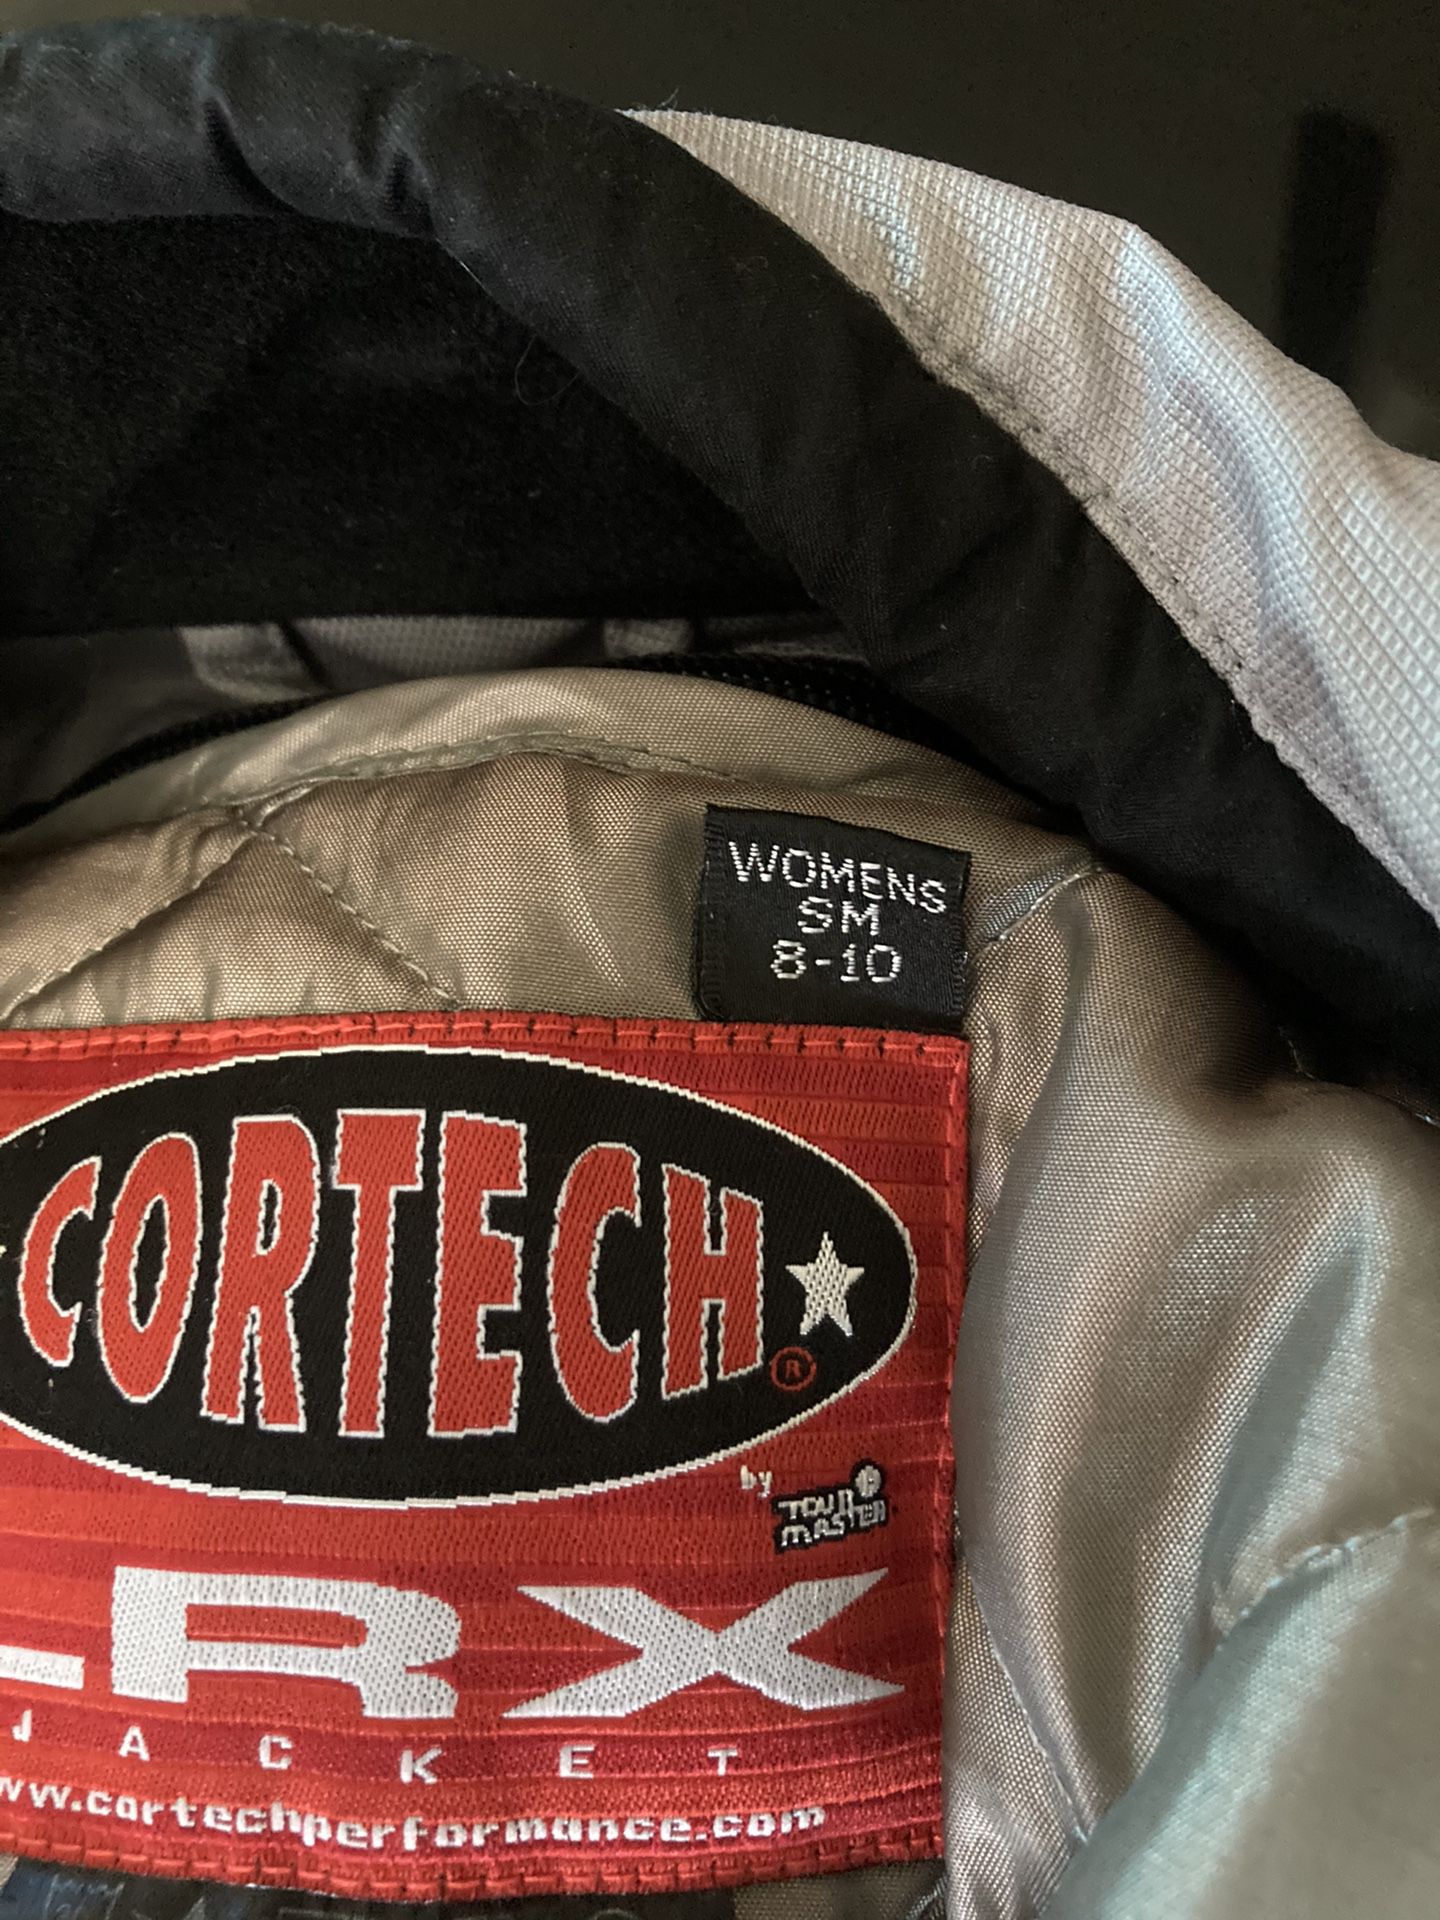 Cortech Womens Motorcycle Jacket (SMALL) 